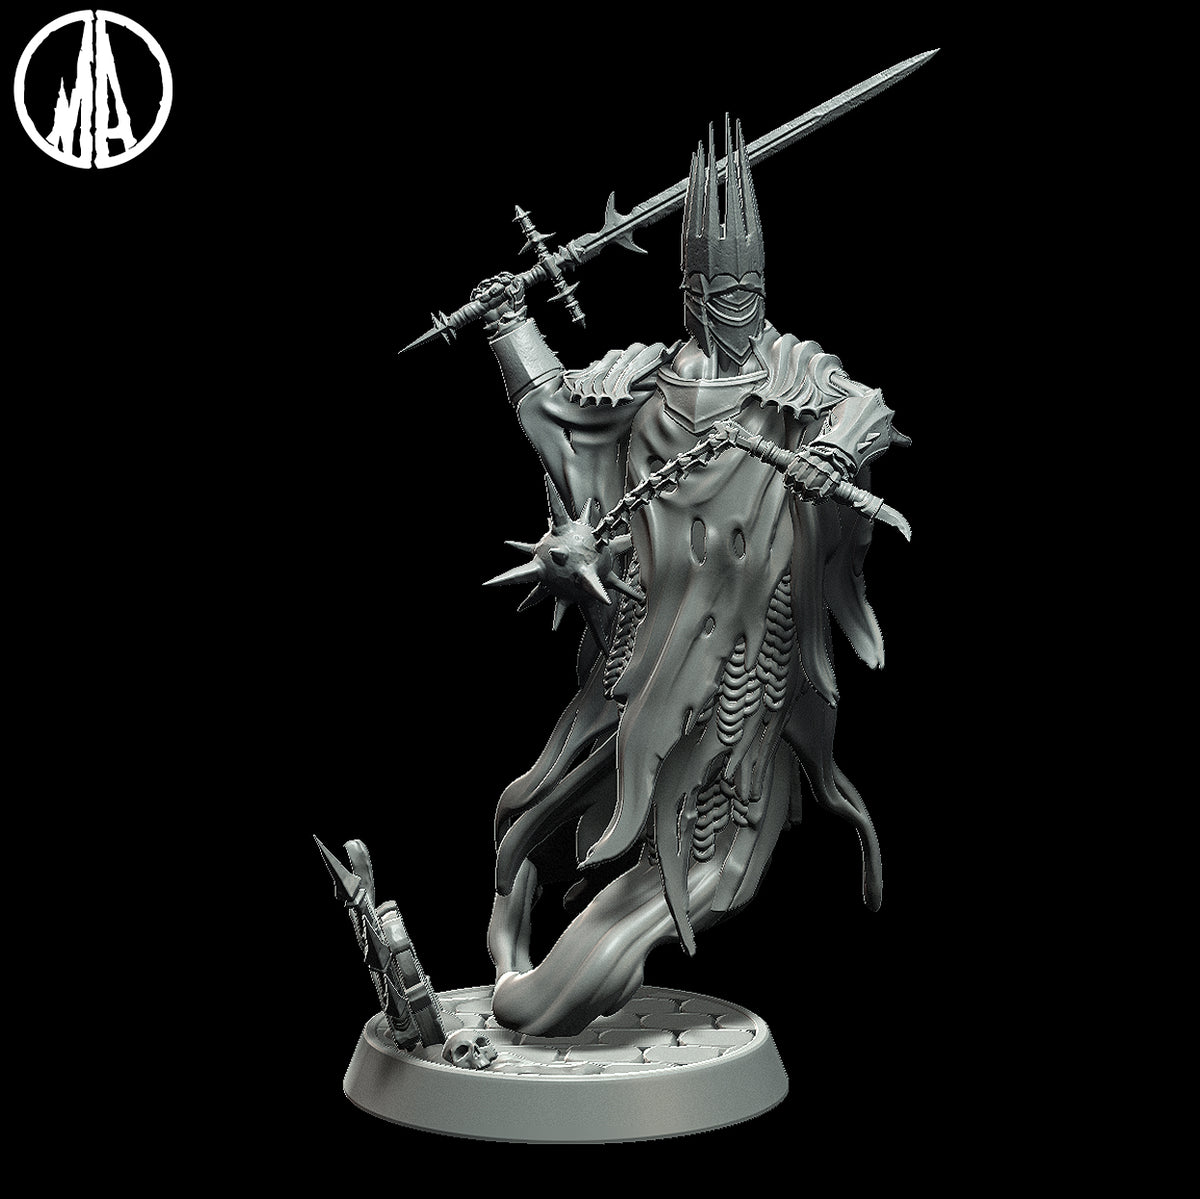 Wraith King | 32mm Scale Resin Model | From the Lost Souls Collection